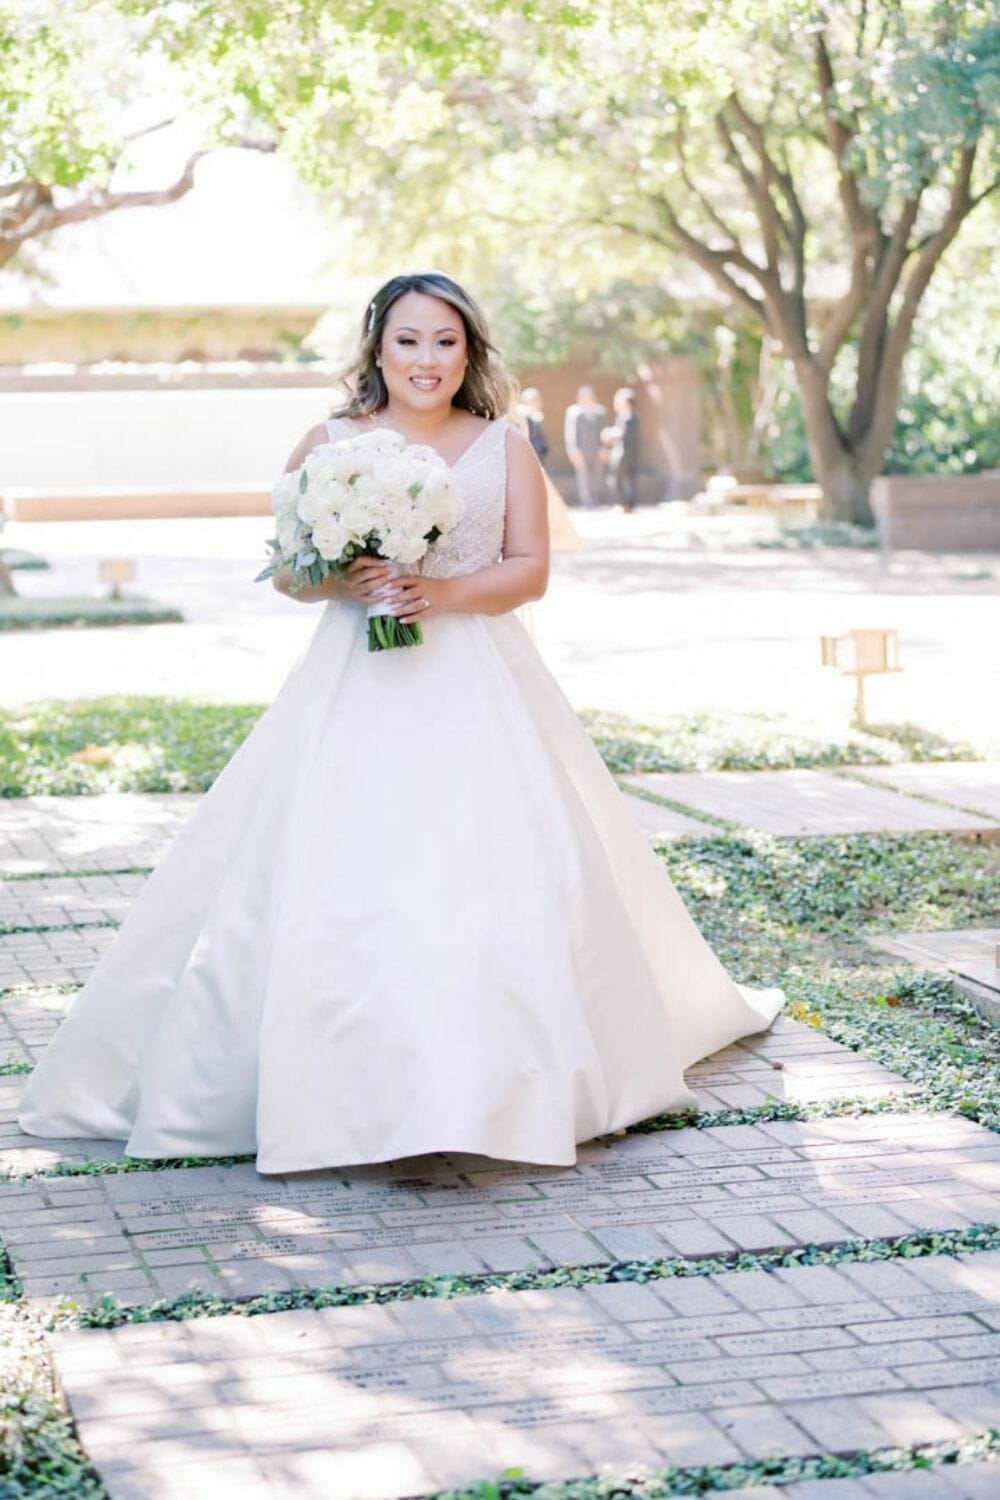 Bride walking in a Ball Gown Wedding Dress photo by Nhan Nguyen Photography